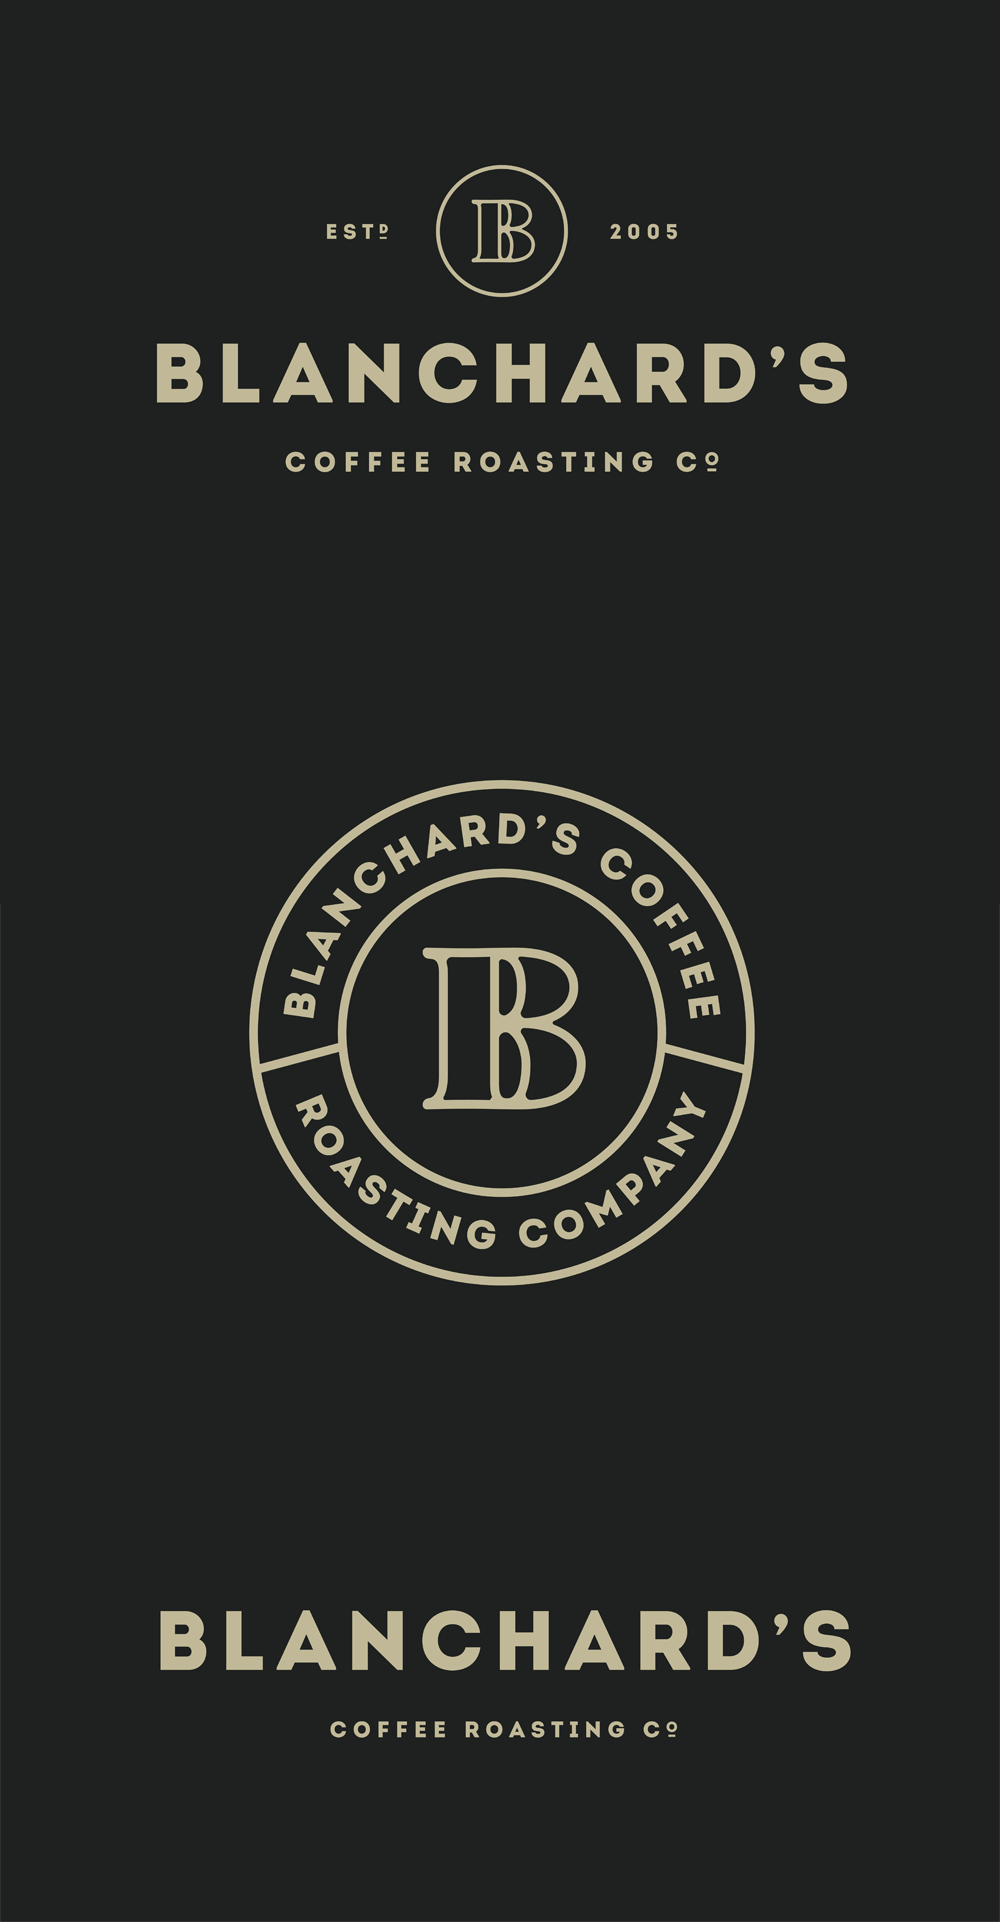 Coffee Shop Brand Logo - New Logo and Packaging for Blanchard's by Skirven & Croft | Identity ...